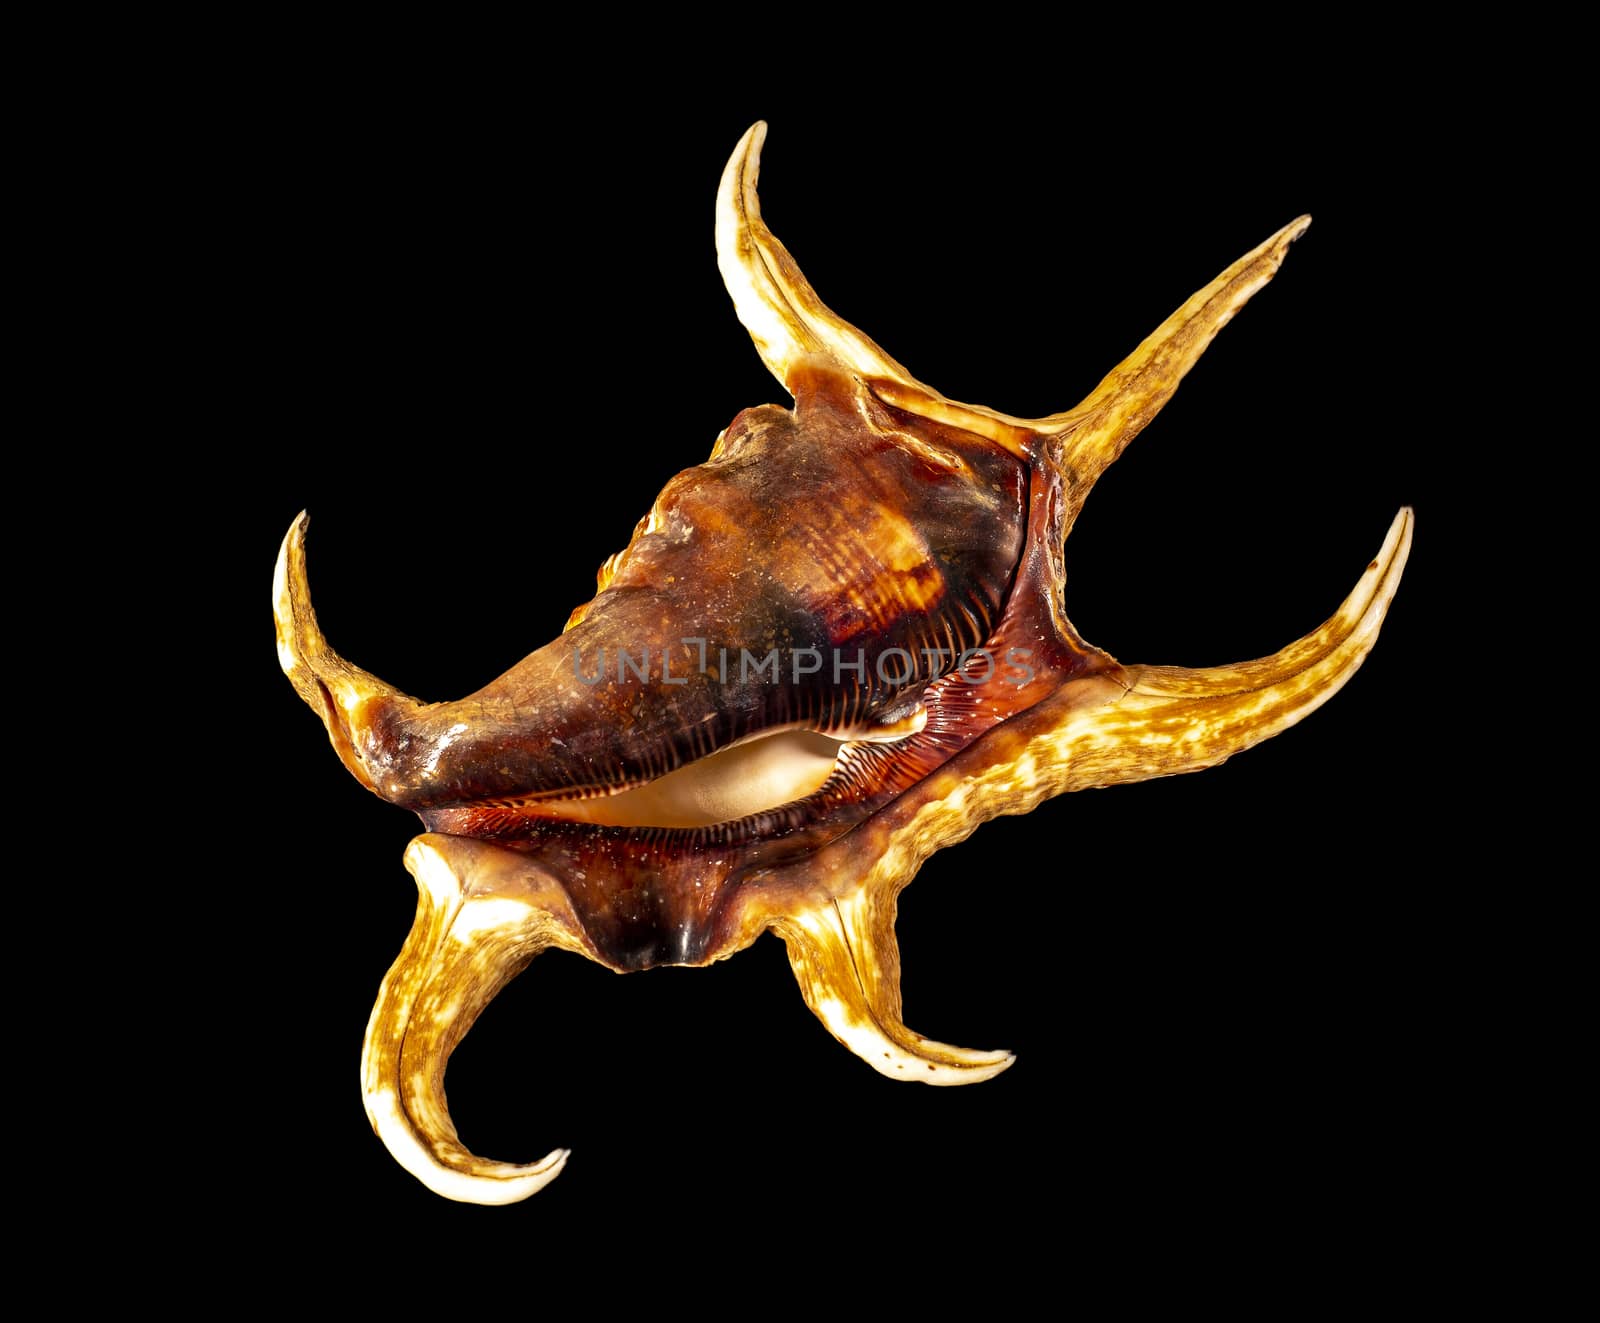 Sea shell isolated on a black background. Lambis is a genus of large sea snails sometimes known as spider conchs, marine gastropod mollusks in the family Strombidae